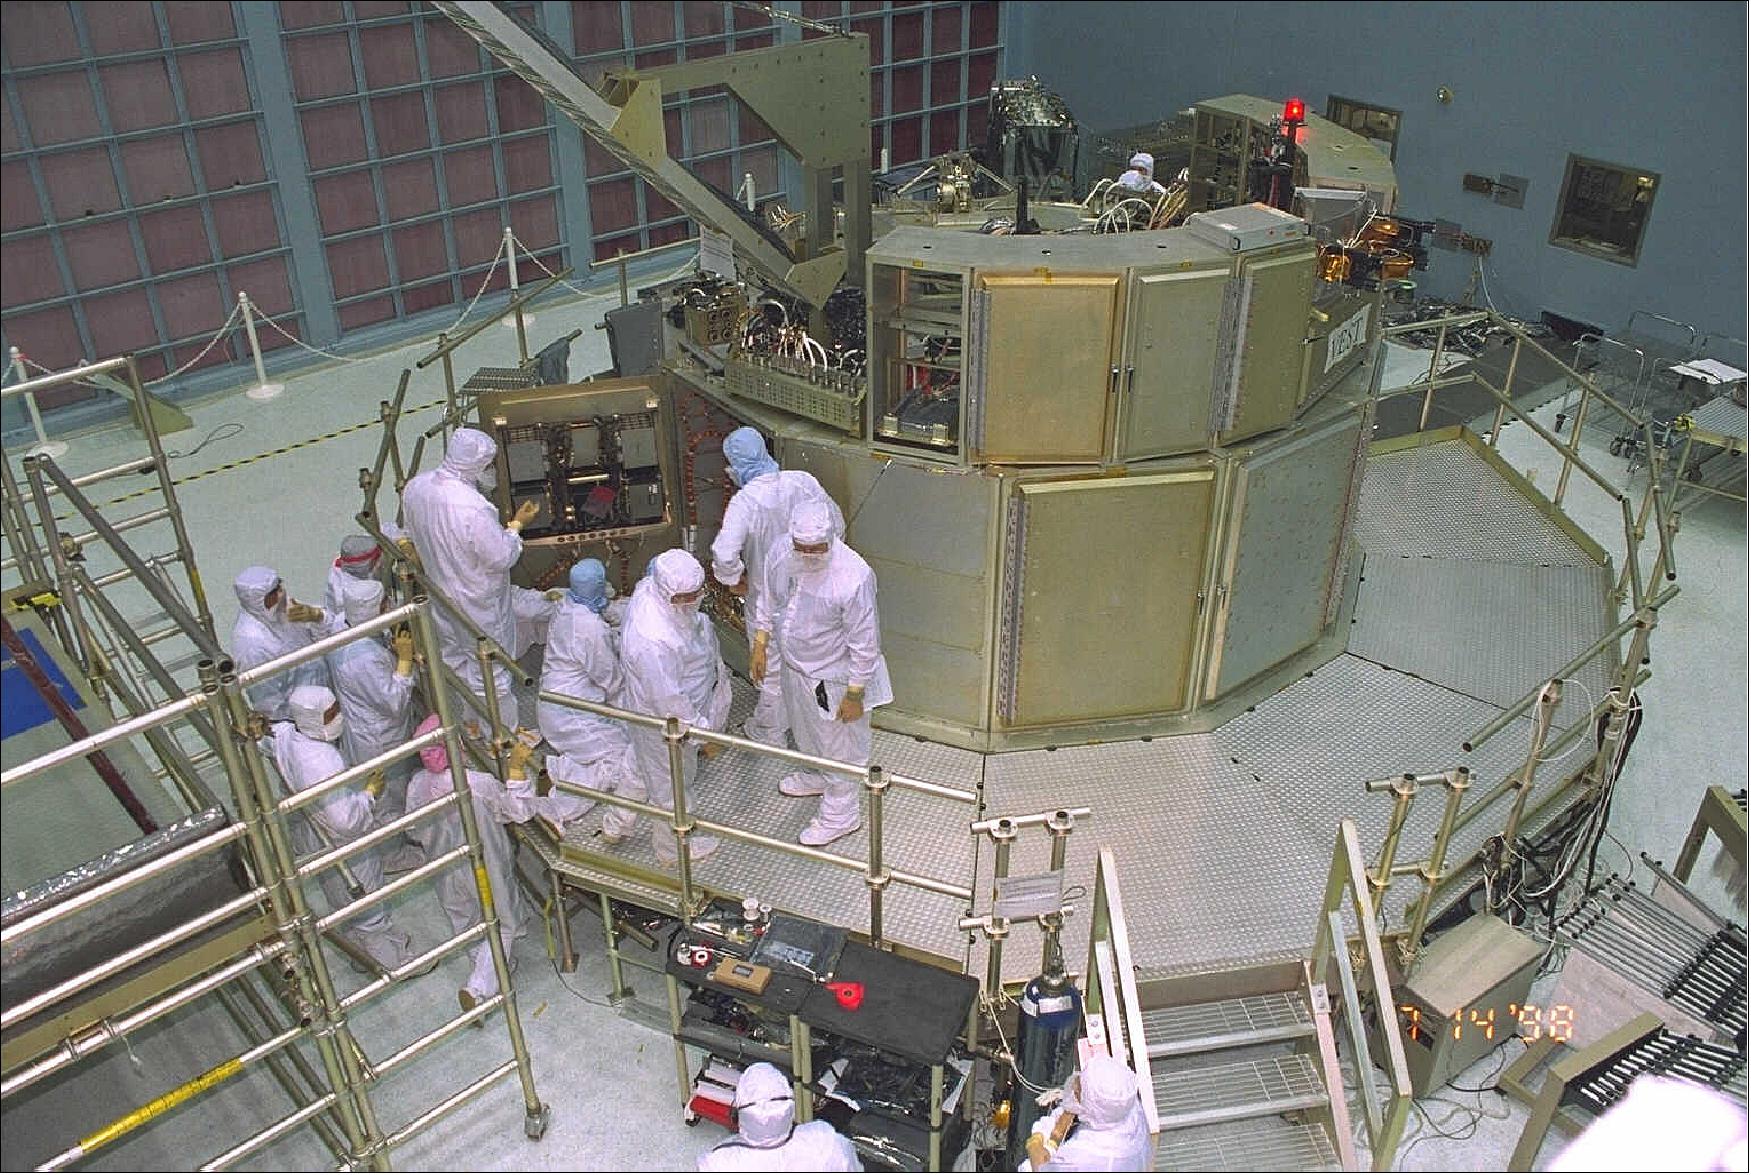 Figure 77: Astronauts underwent training at NASA’s Goddard Space Flight Center in Greenbelt, Maryland, prior to each of the HST servicing missions. In this image the Servicing Mission 3A (December 1999) astronauts are seen receiving instruction from Hubble project personnel on various spacecraft subsystems. At the time, the VEST main structure was located in Goddard’s large building 29 clean room (image credit: NASA)